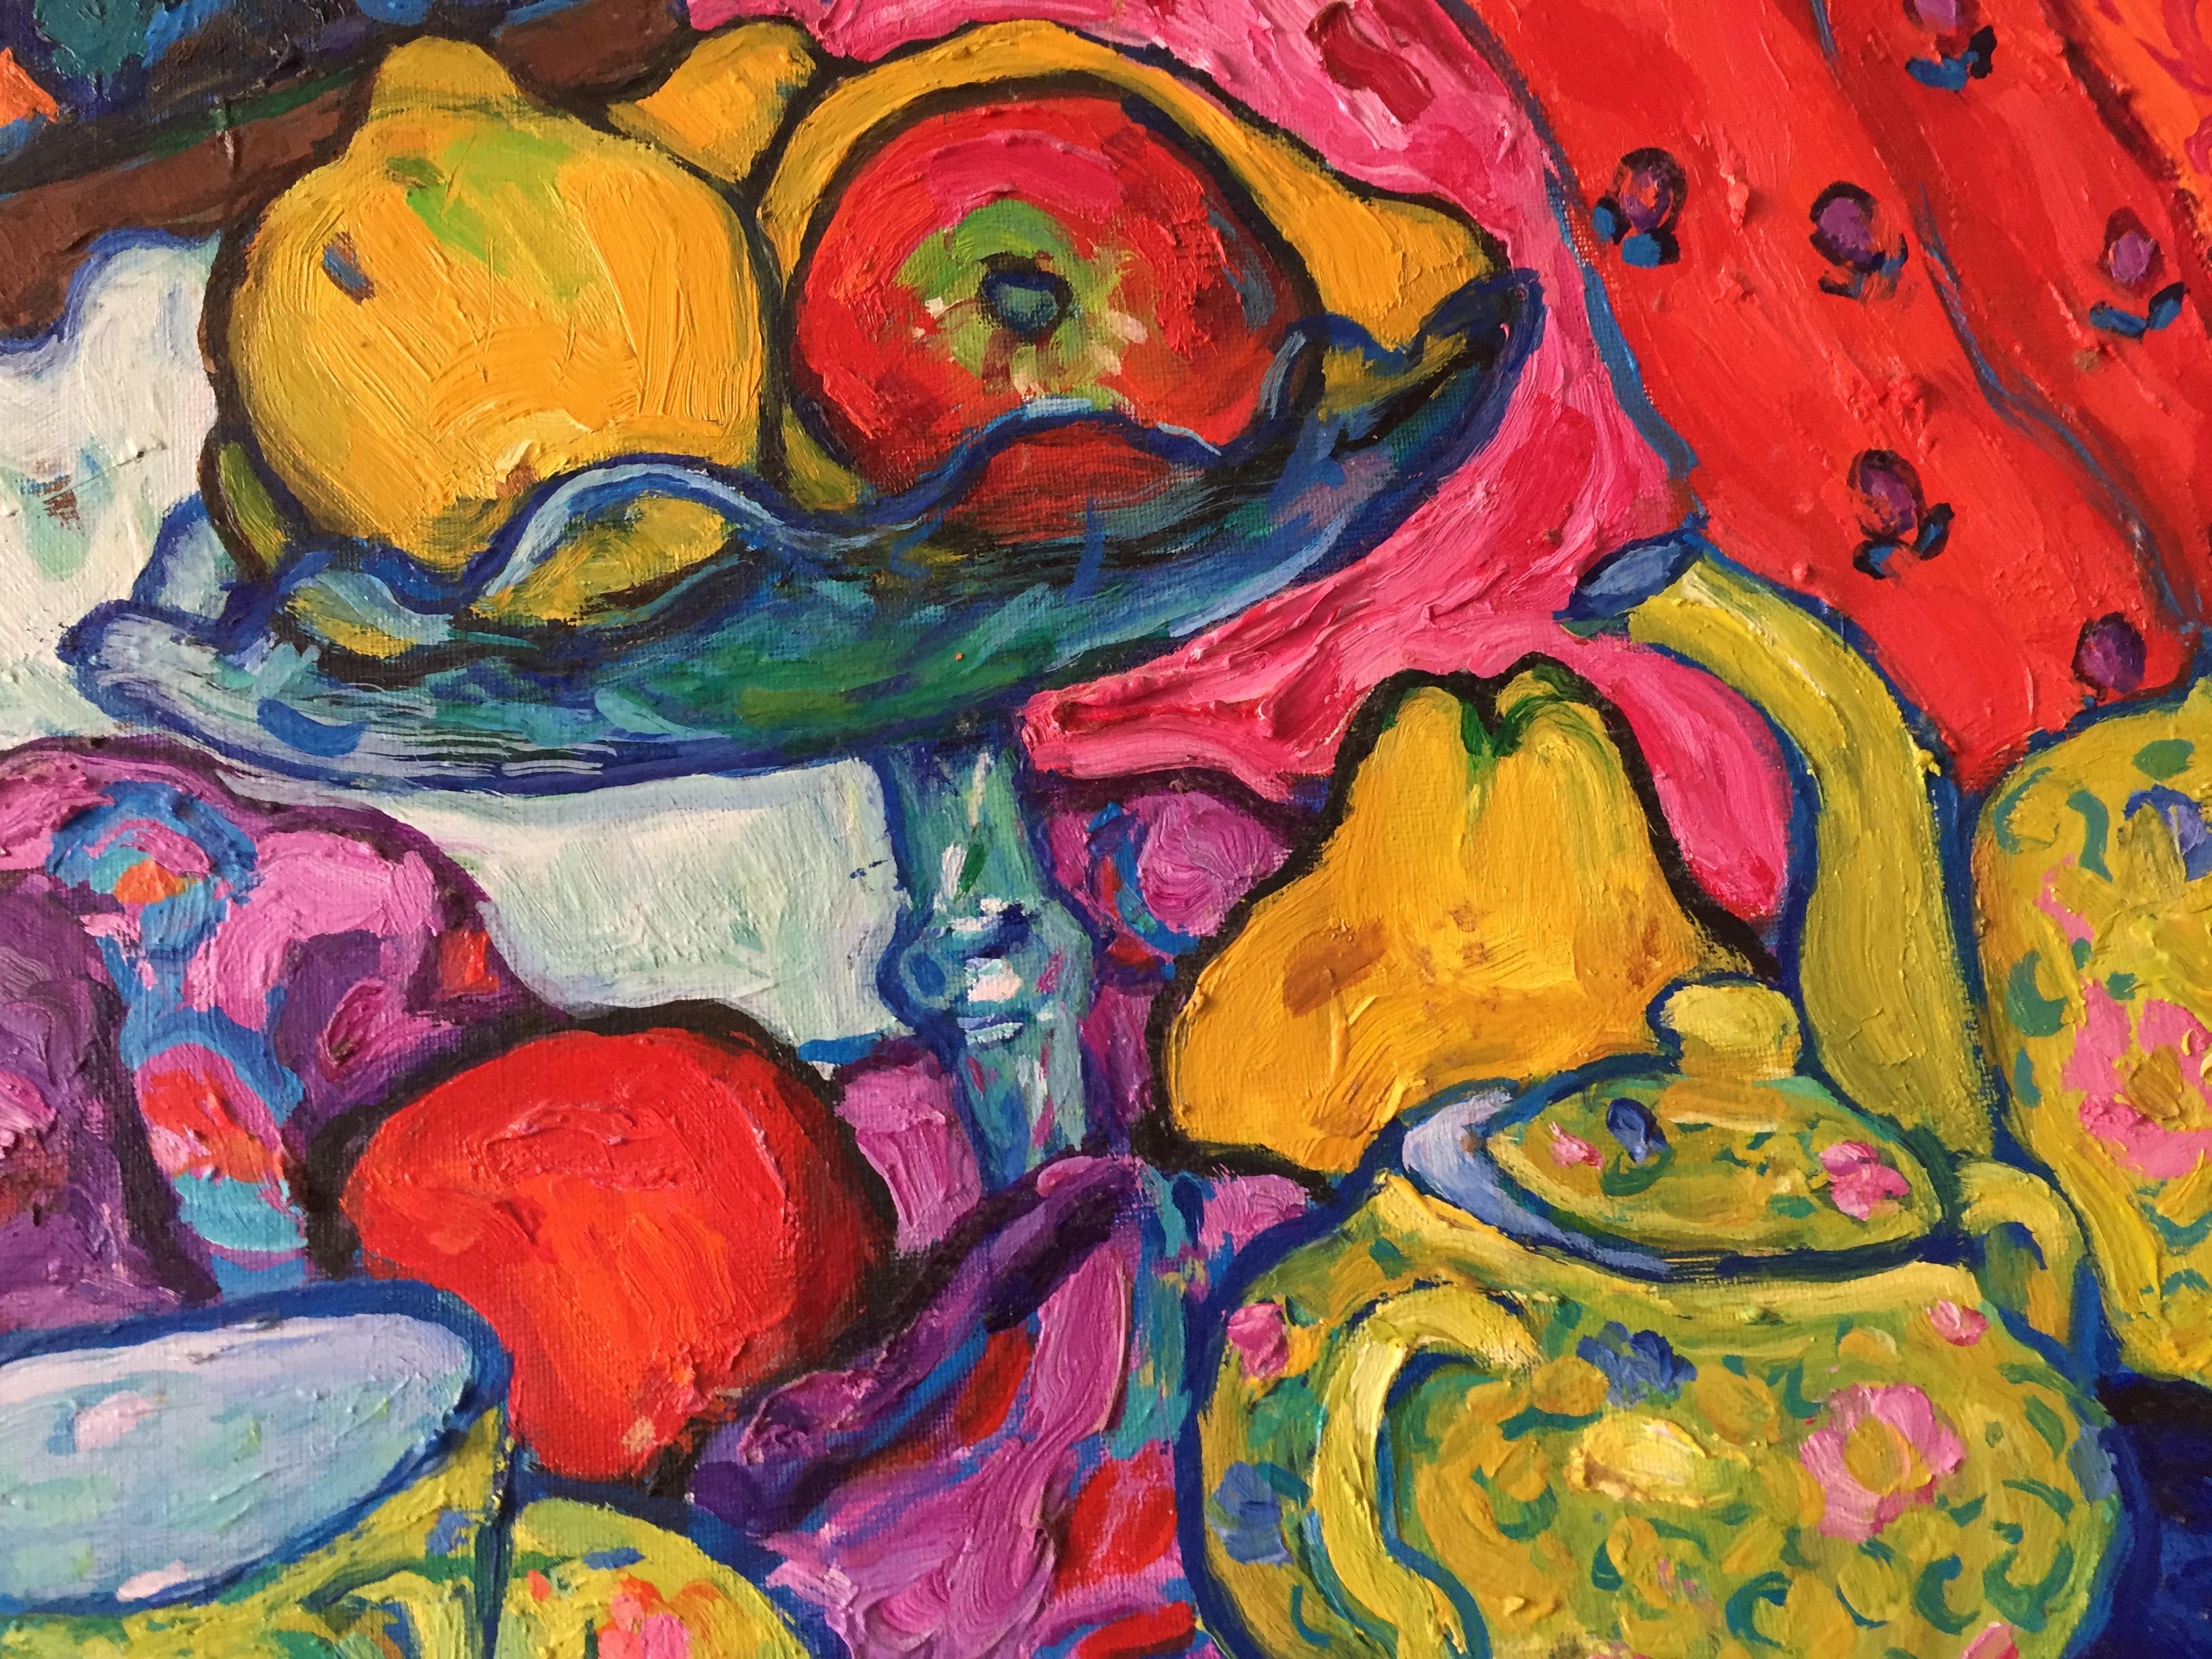 Still-life with teapot. Figurative and colorful Oil on canvas Painting in Fauvist style.
Author: Elena Negueroles (Spain)
Measurements in centimeters: 46 x 61 x 2 cm /  In inches: 18.11 x 24.02 x 0.79 